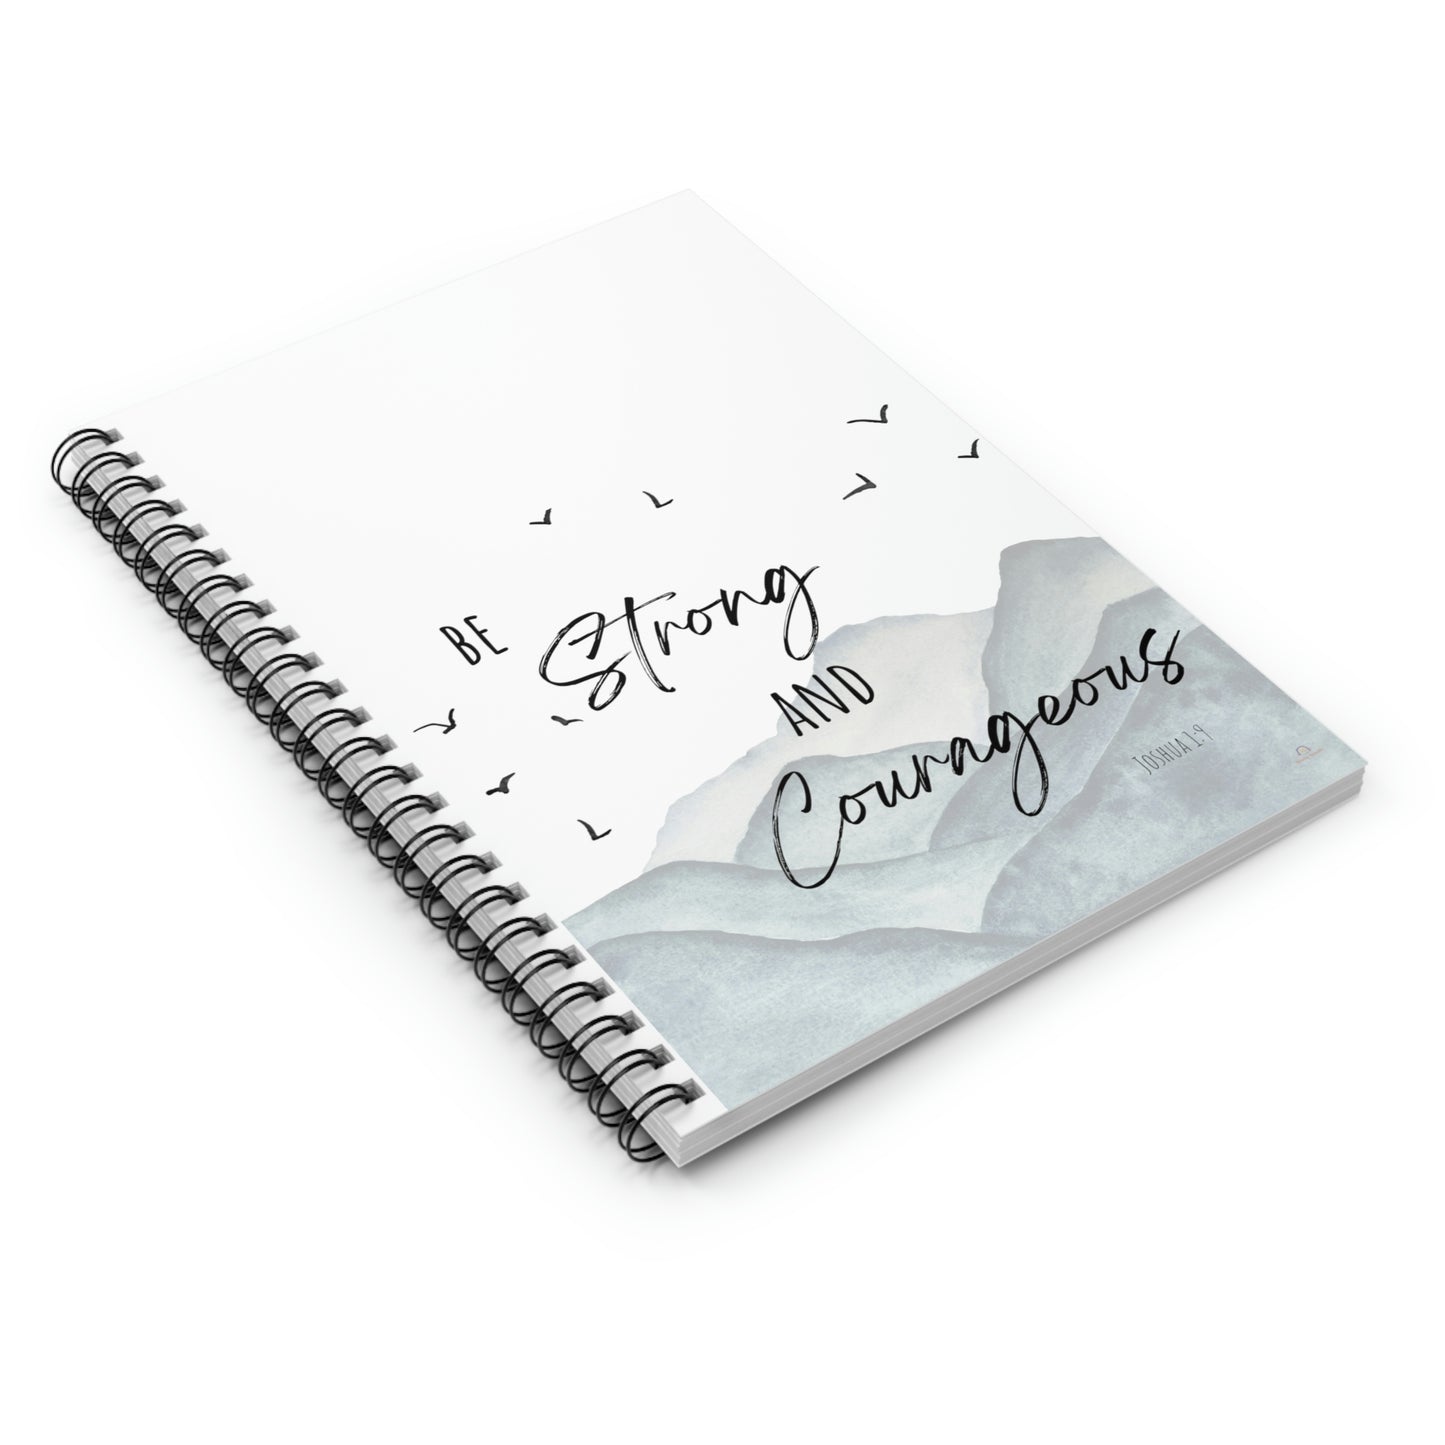 Be strong and courageous spiral notebook